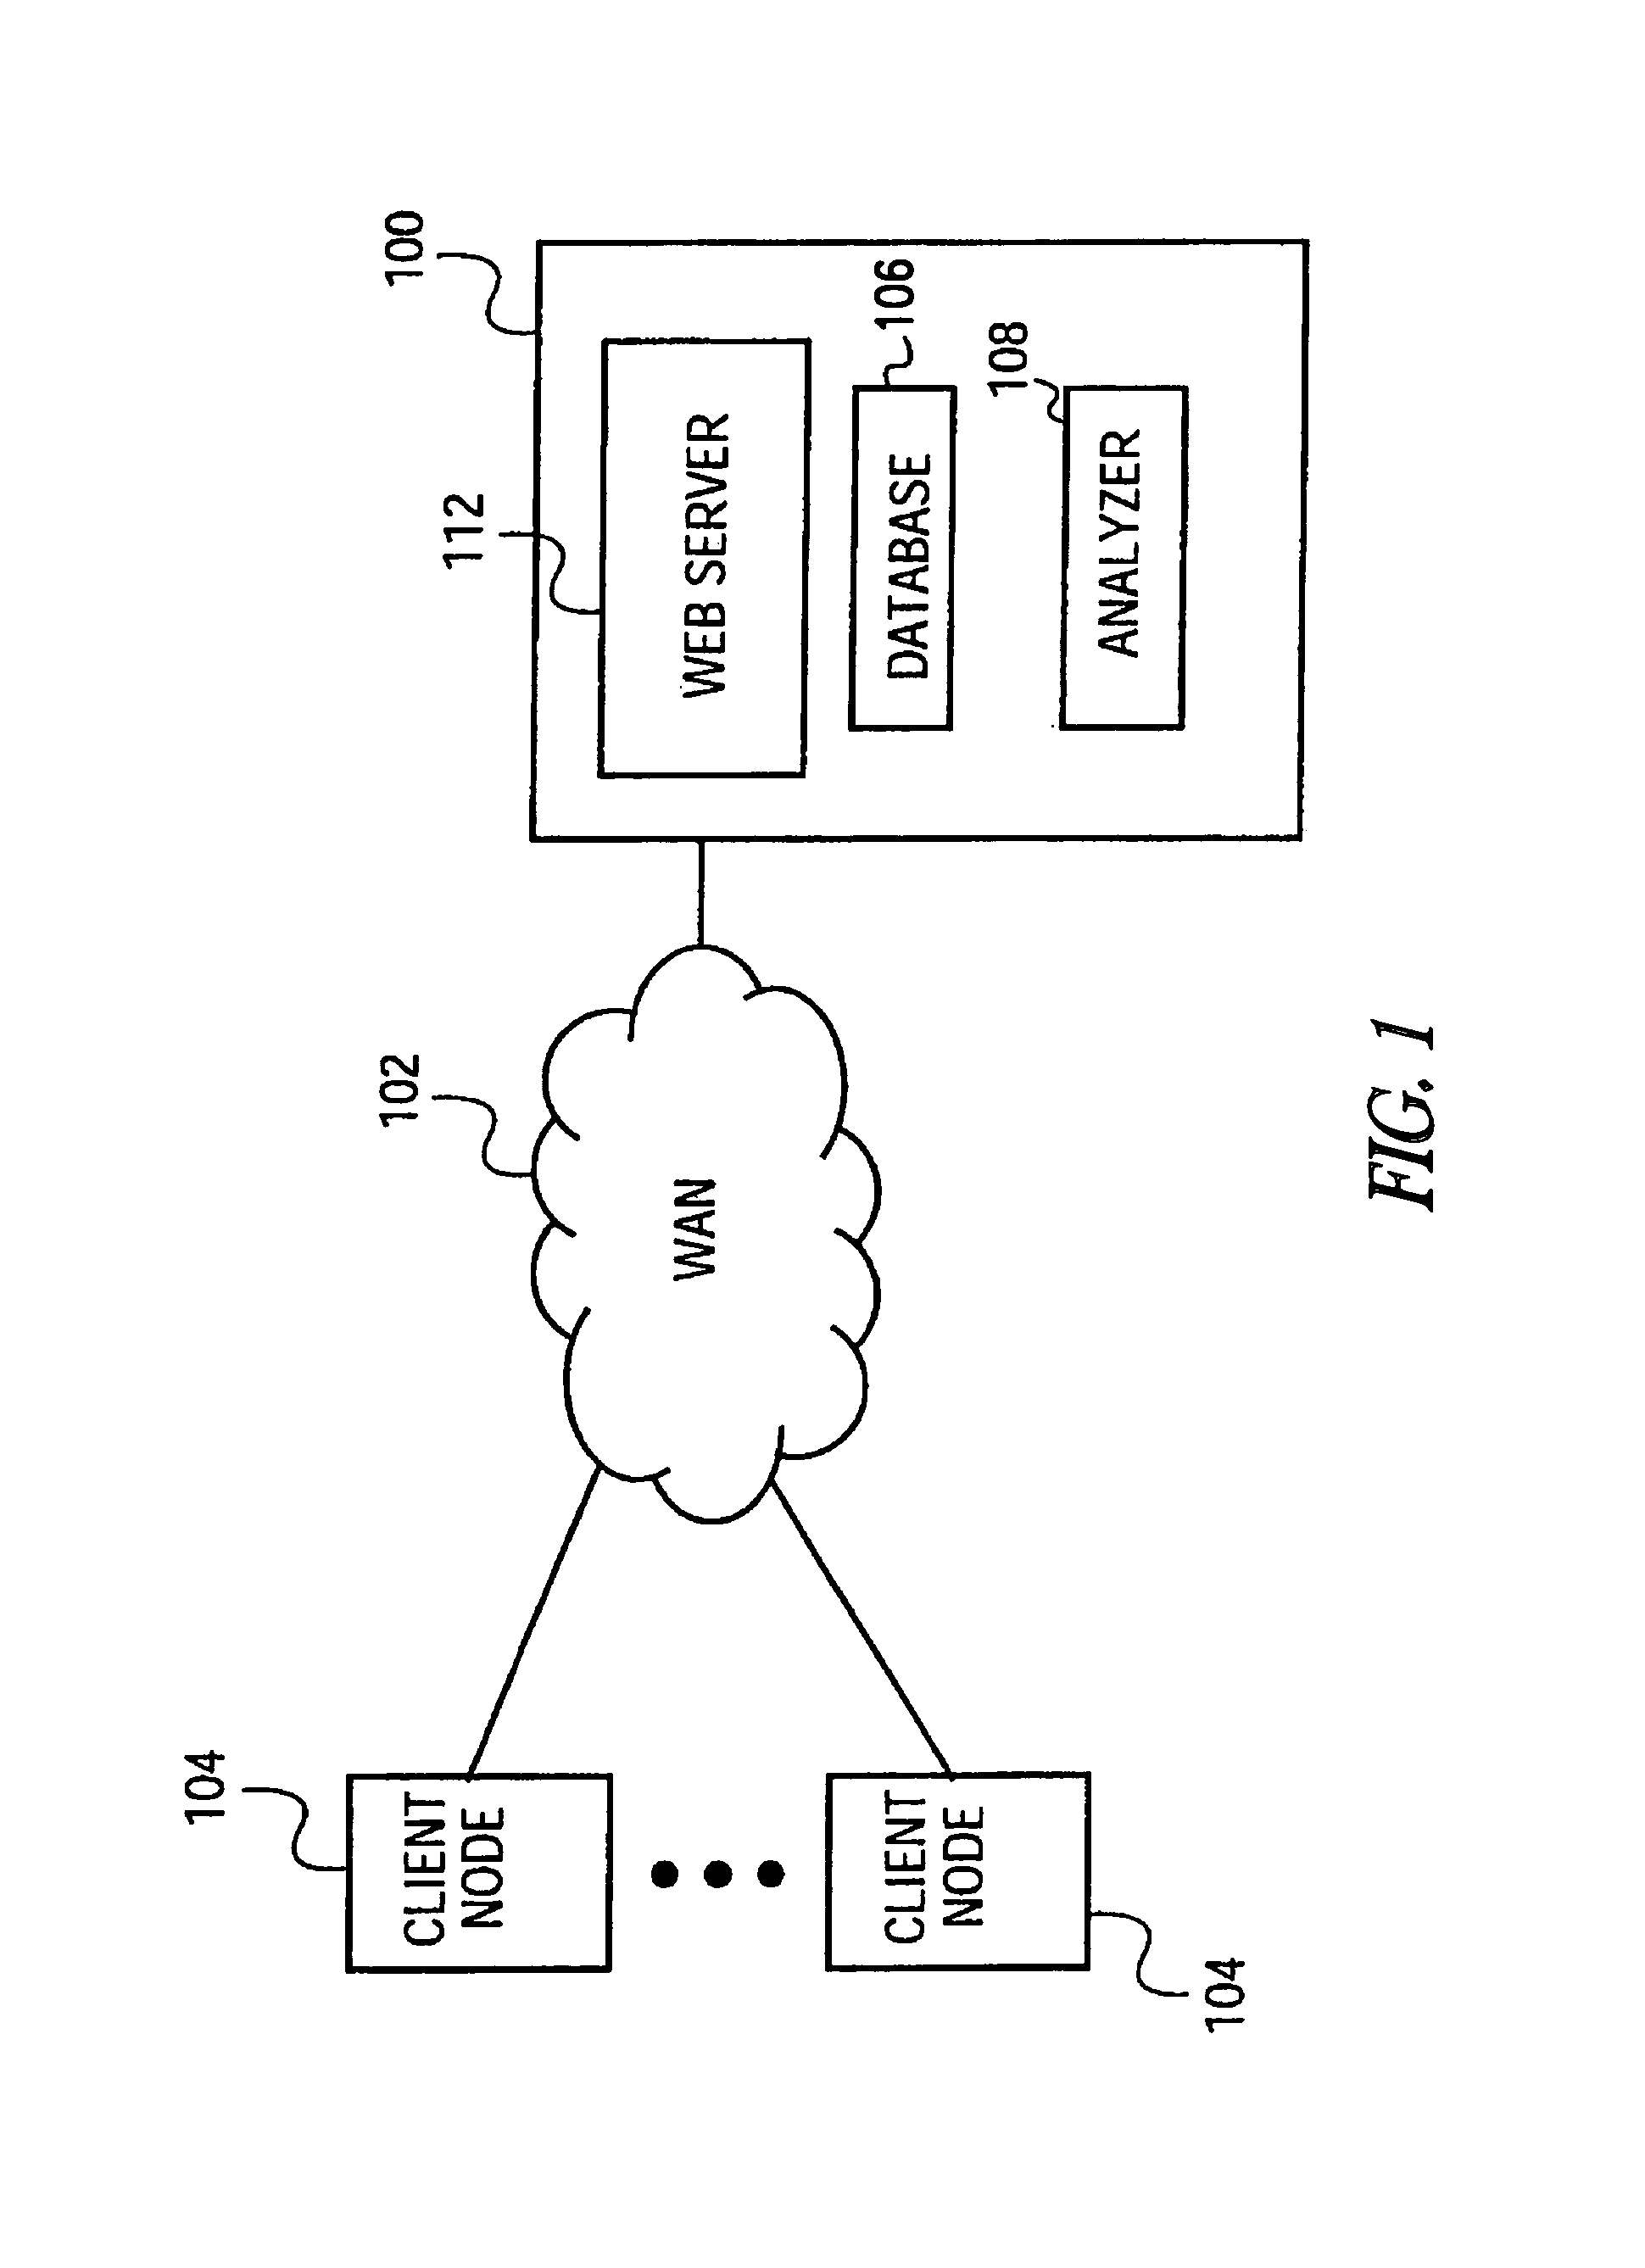 Graphical user interface for filtering a population of items